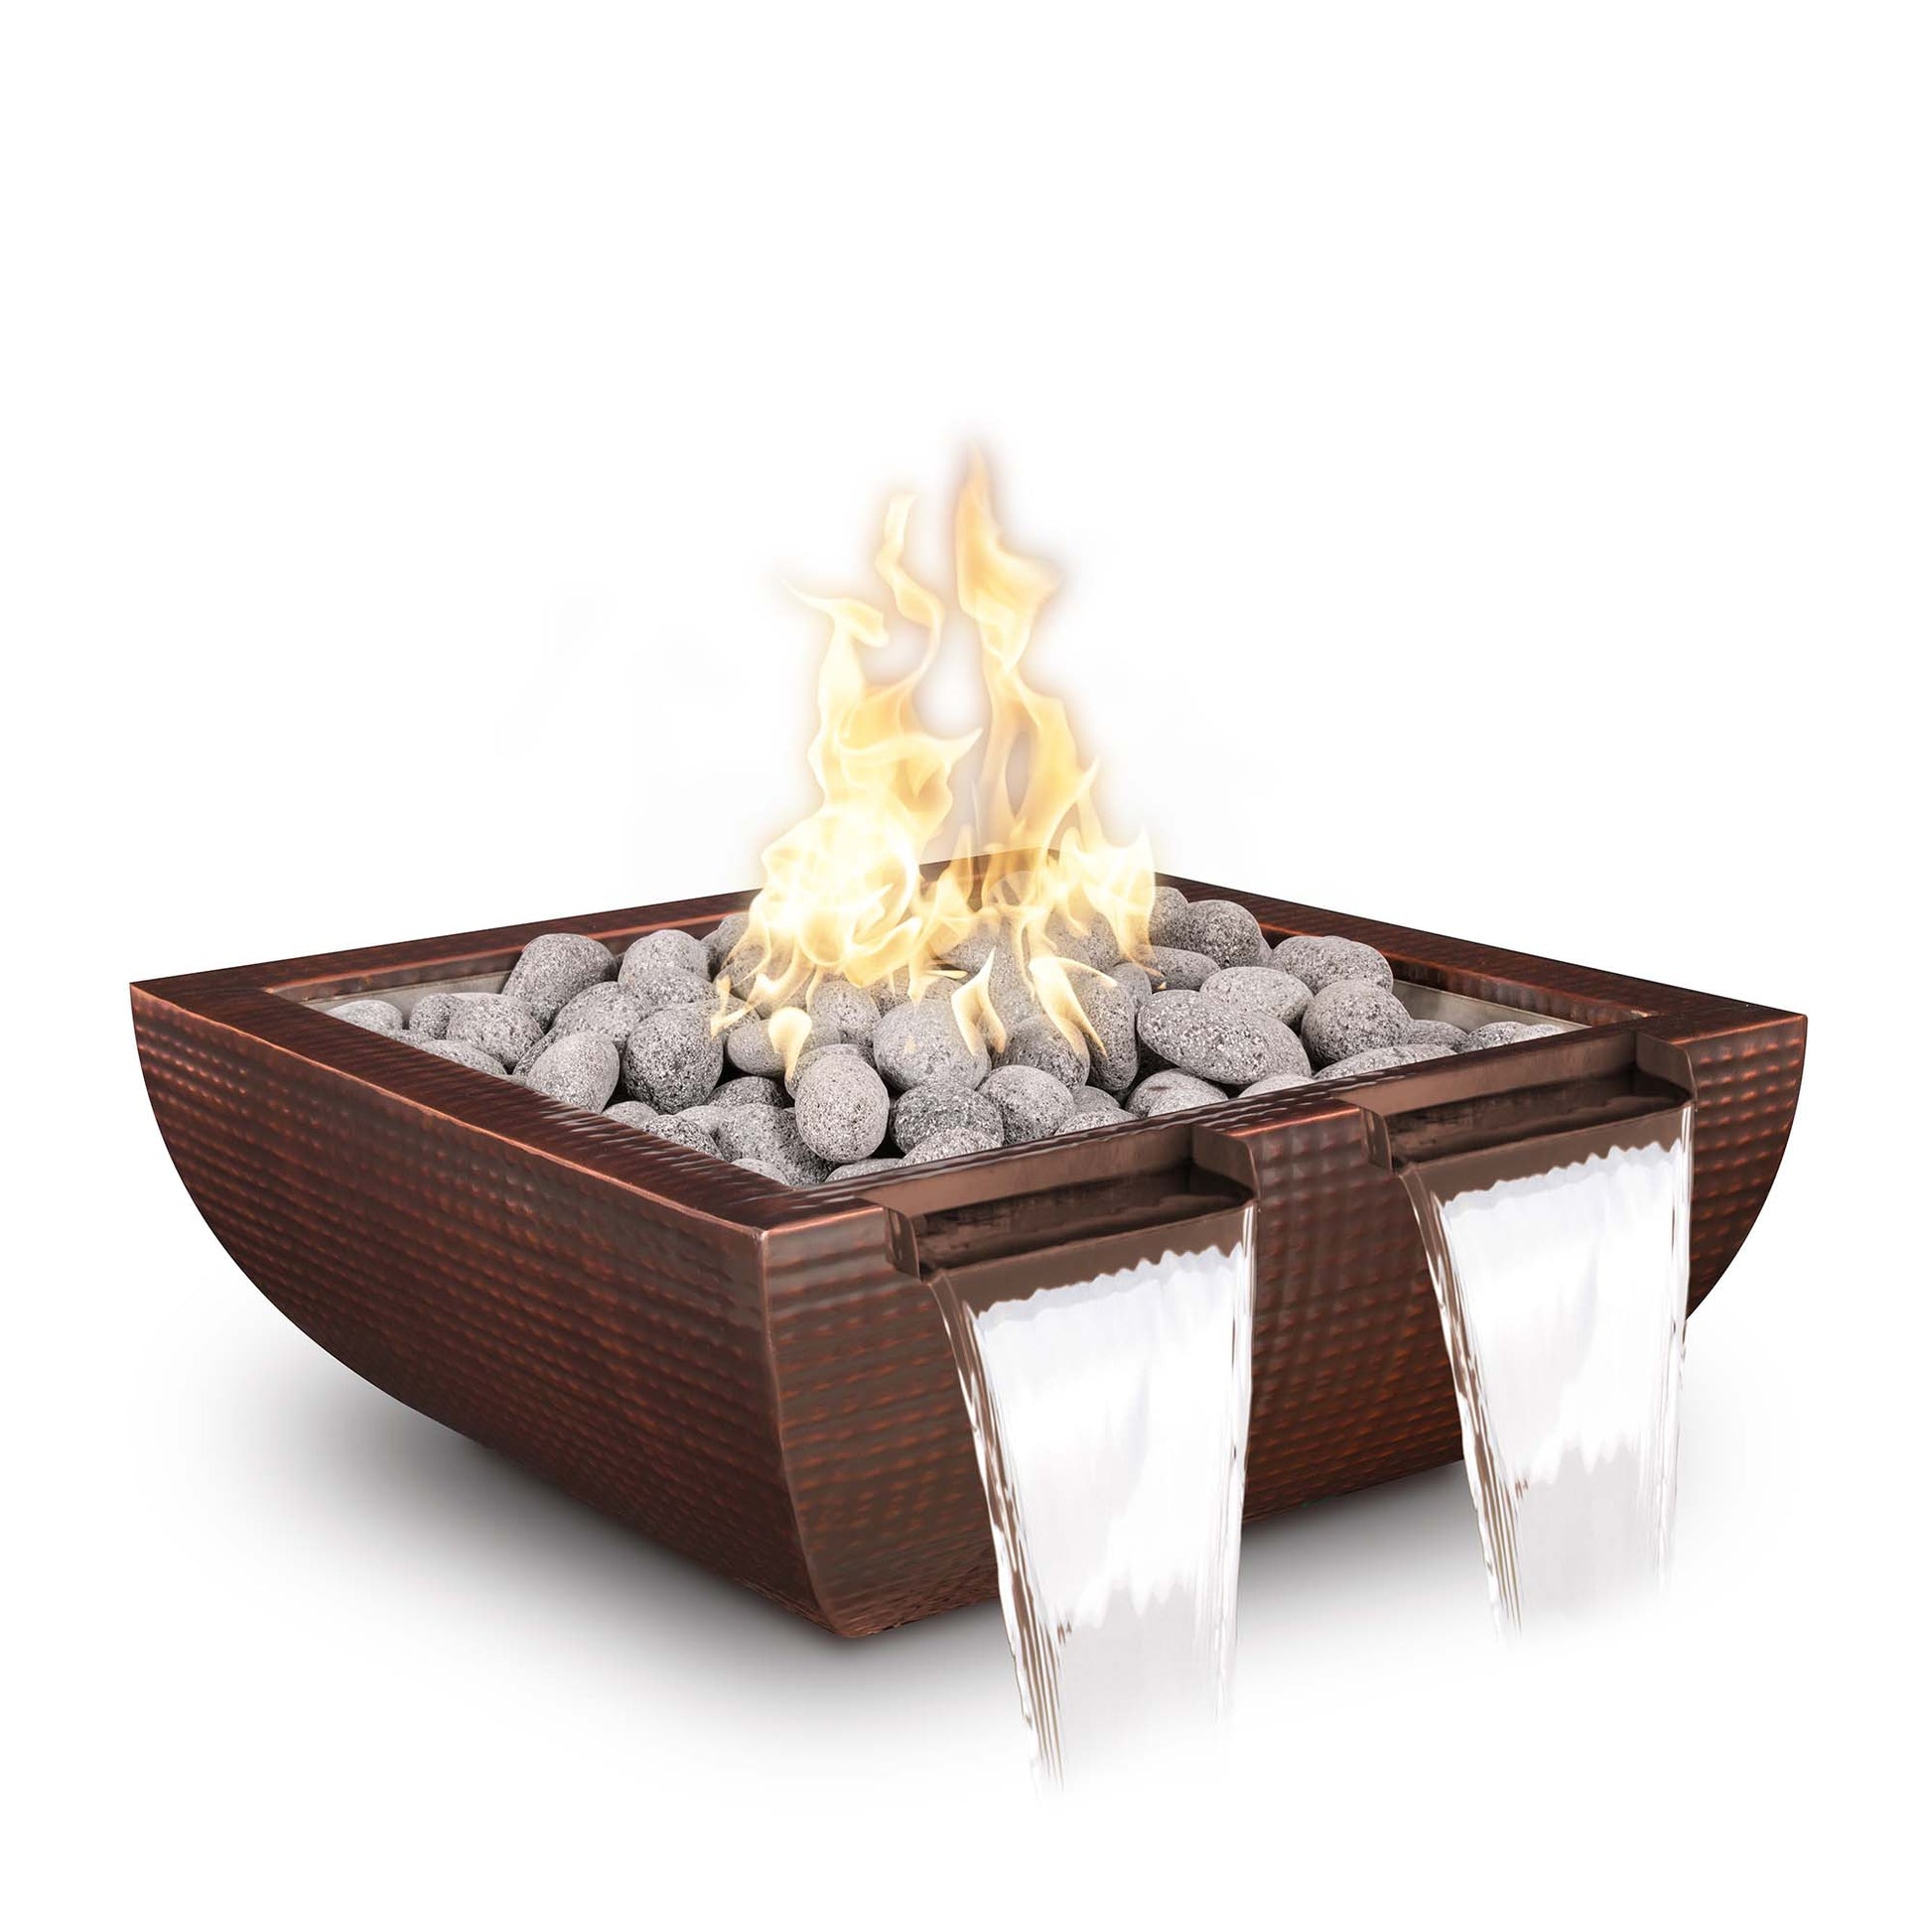 The Outdoor Plus Avalon Twin Spill 30" Black Powder Coated Metal Natural Gas Fire & Water Bowl with Match Lit with Flame Sense Ignition